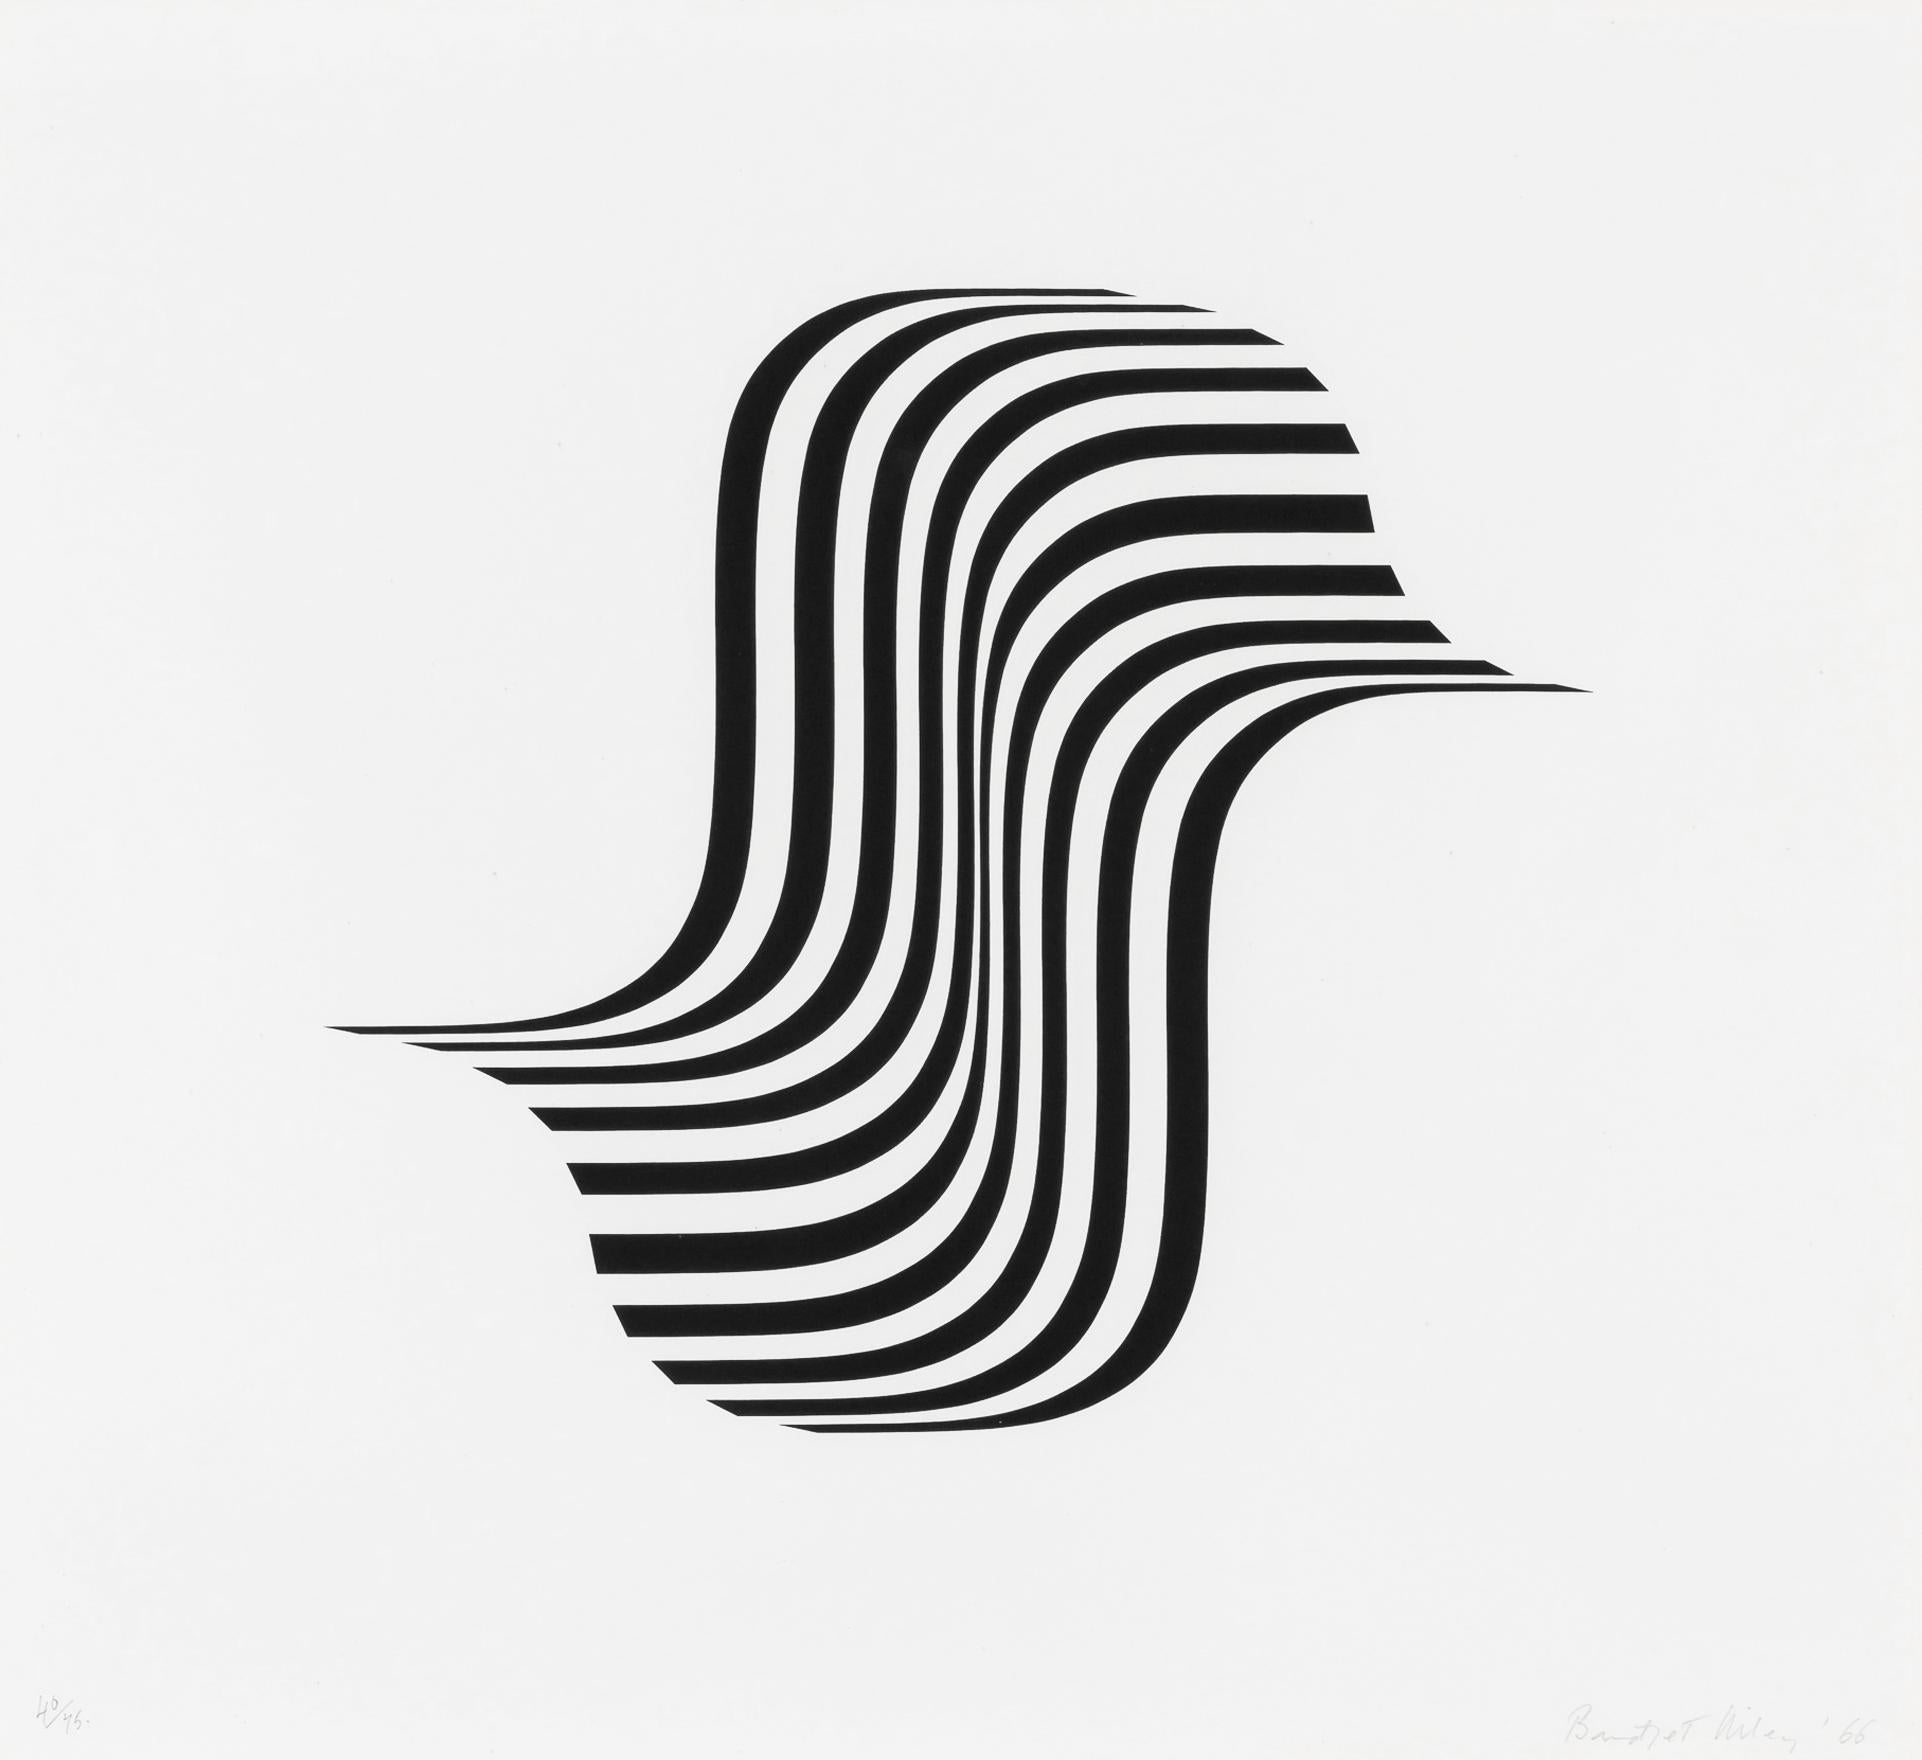 Bridget Riley Abstract Print - Untitled "Winged Curve"